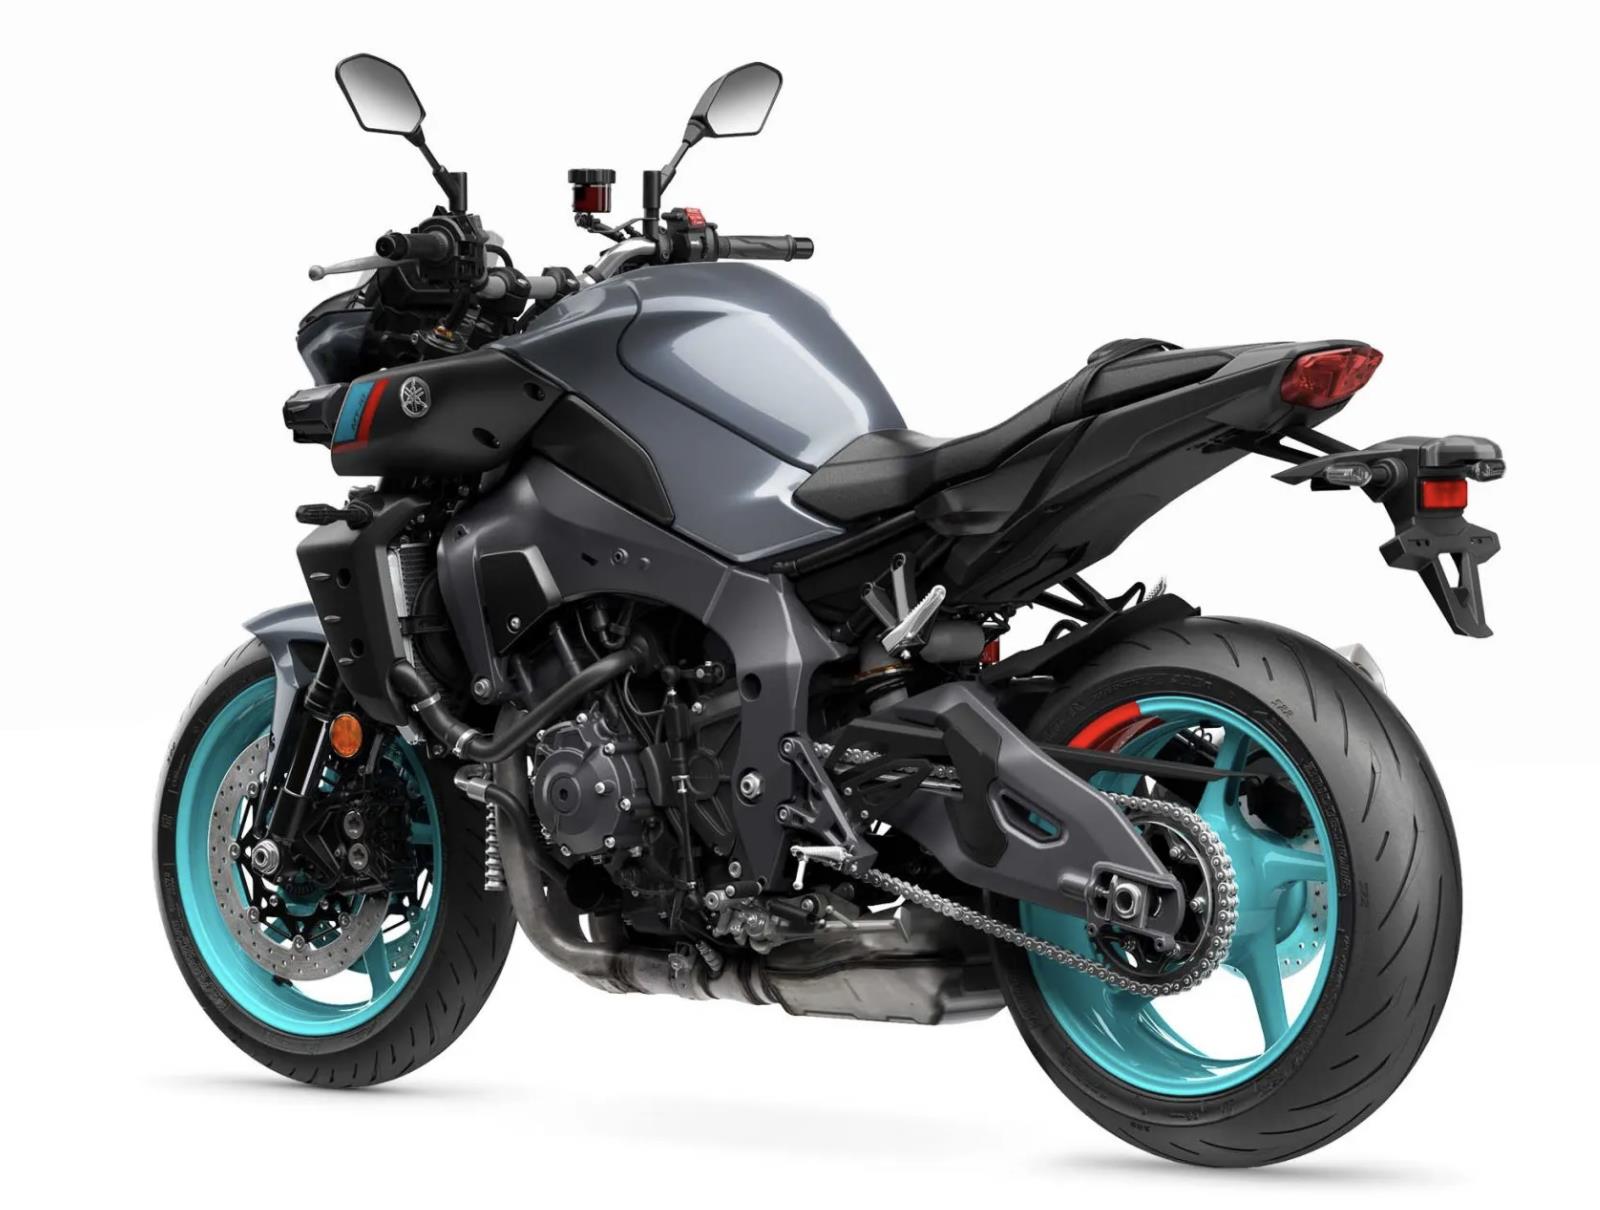 2023 Yamaha MT10 Specifications and Expected Price in India